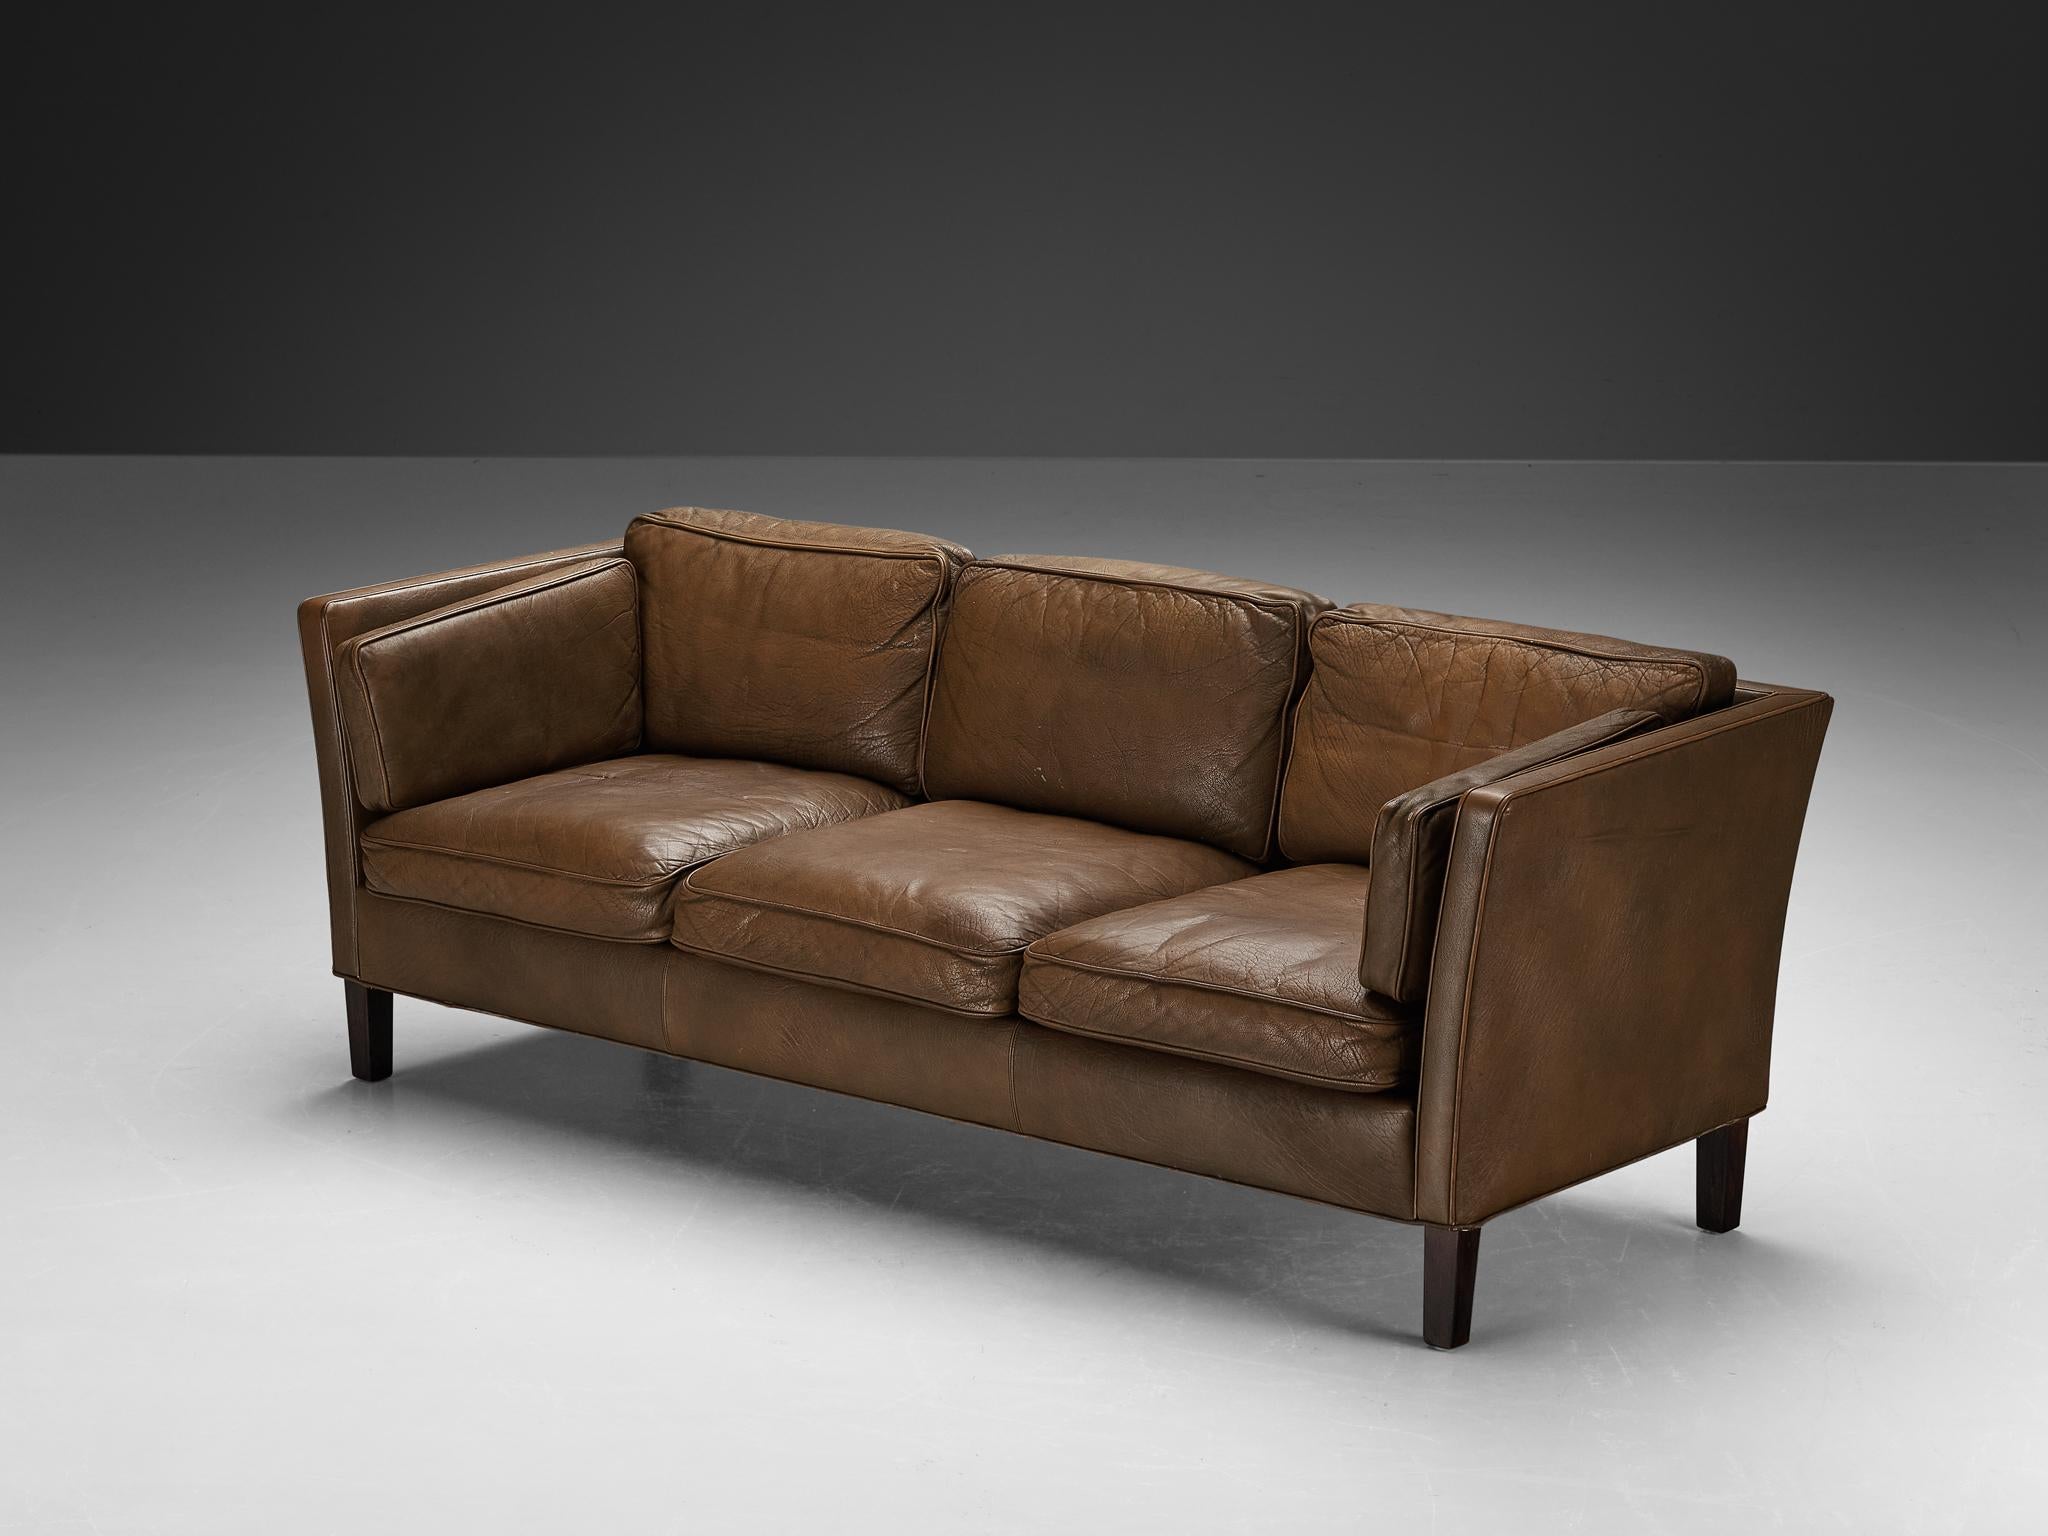 Sofa, leather, stained beech, Denmark, 1960s

This modern sofa embodies a distinct open layout and features the use of neutral materials. Characterized by simplicity, clarity, and a deliberate absence of ornamentation, the furniture piece stands as